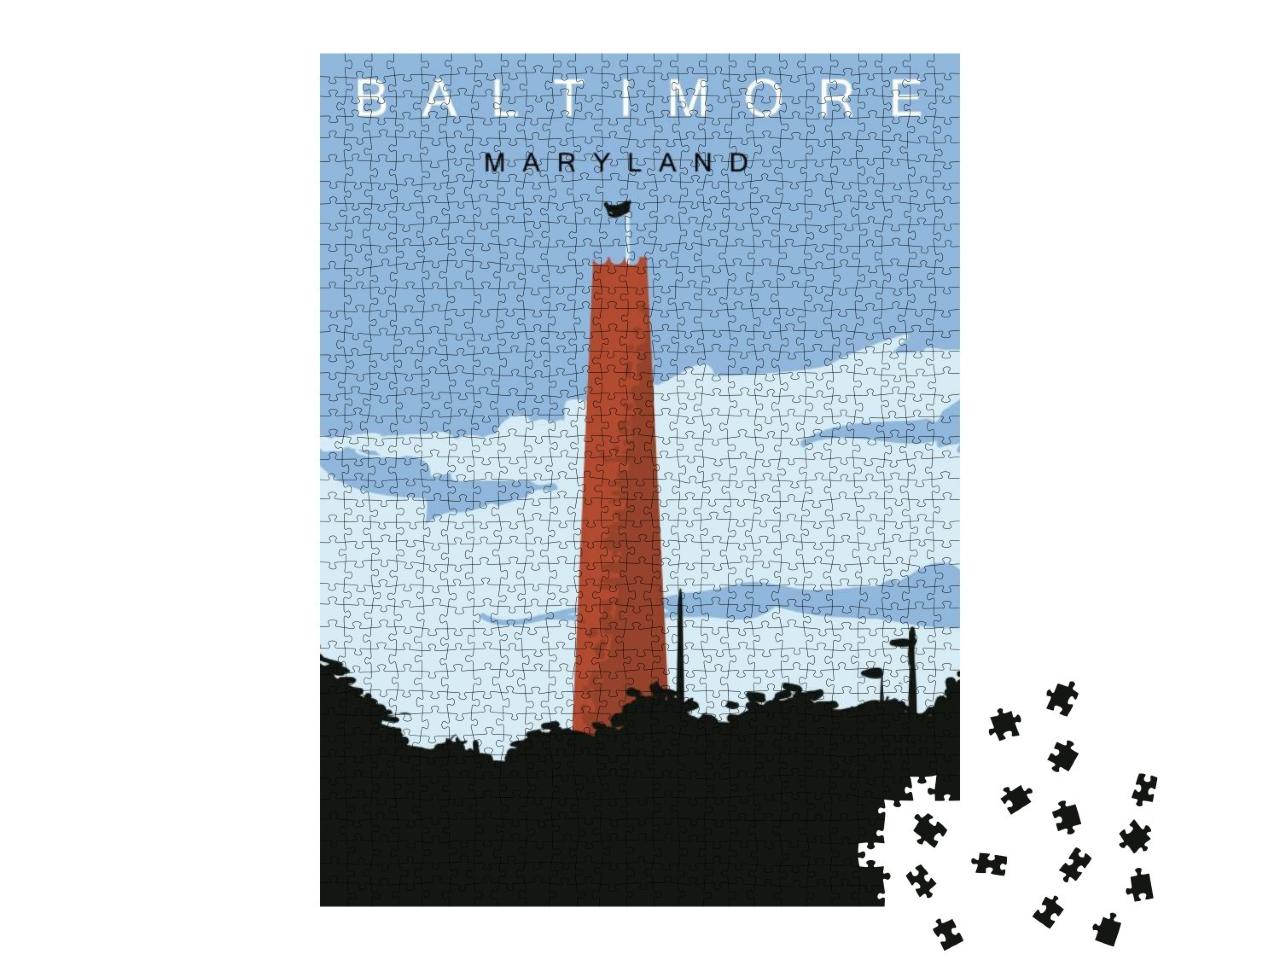 Baltimore Modern Vector Poster. Baltimore, Maryland Lands... Jigsaw Puzzle with 1000 pieces